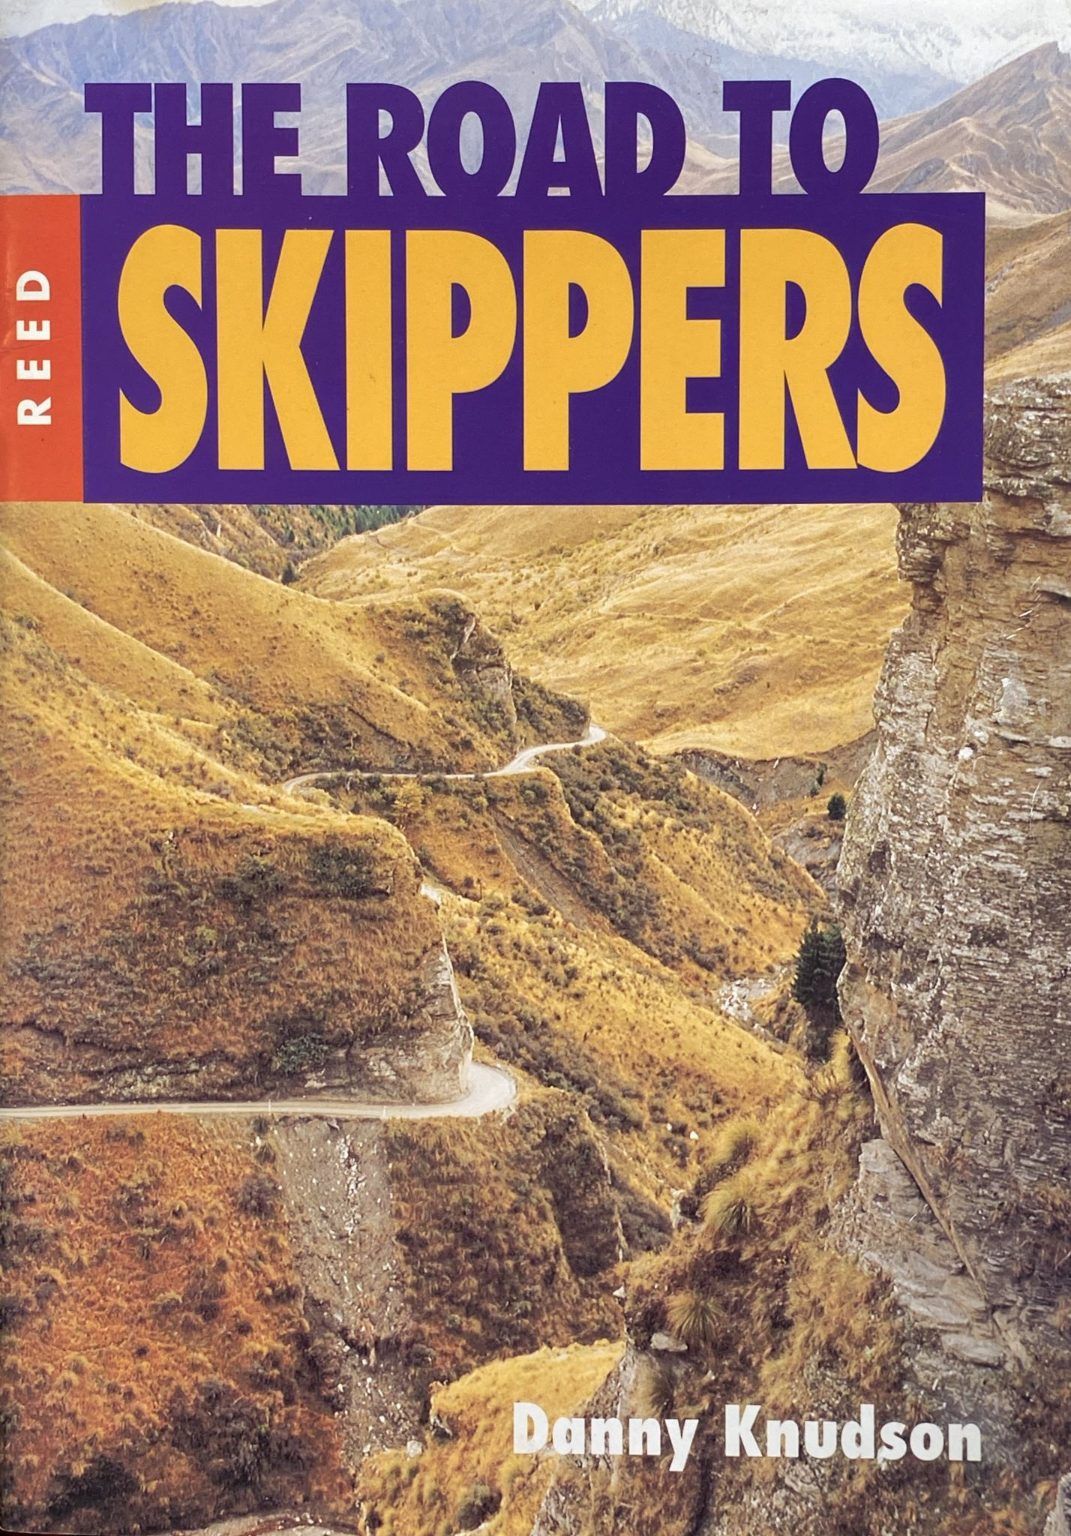 THE ROAD TO SKIPPERS